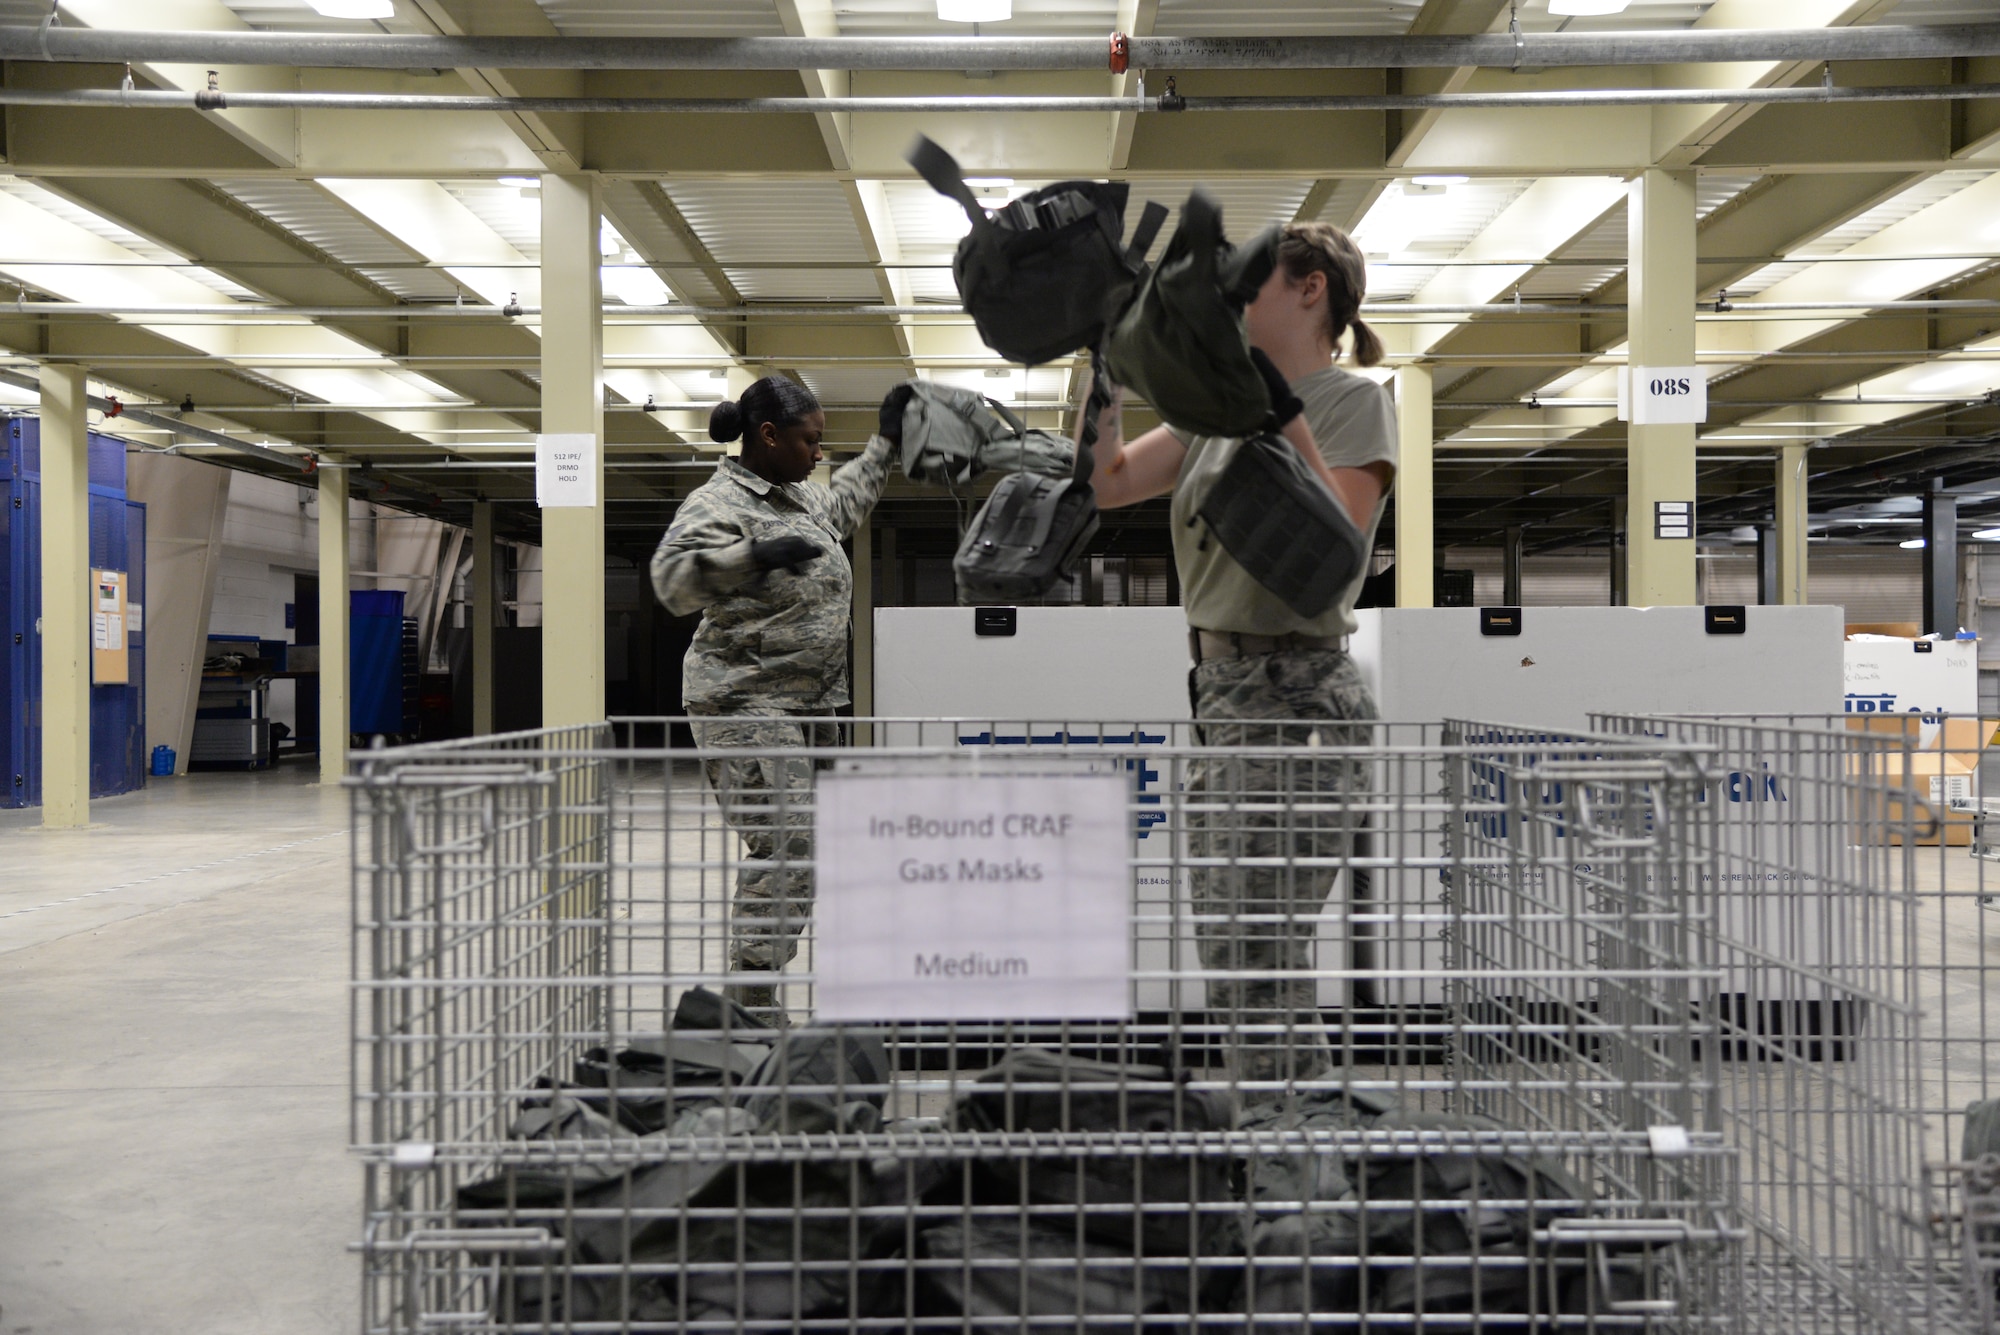 Tech. Sgt. Deanna Parsons, 436th Logistics Readiness Squadron NCO in charge of individual protective equipment, and Airman 1st Class Alizabeth Rawlings, 436th LRS materiel management technician, transfer gas masks to containers during a Civil Reserve Air Fleet readiness exercise Nov. 13, 2017, inside the IPE warehouse on Dover Air Force Base, Del. They maintained accountability for every piece of equipment ensuring no items were lost or unaccounted for. (U.S. Air Force photo by Staff Sgt. Aaron J. Jenne)